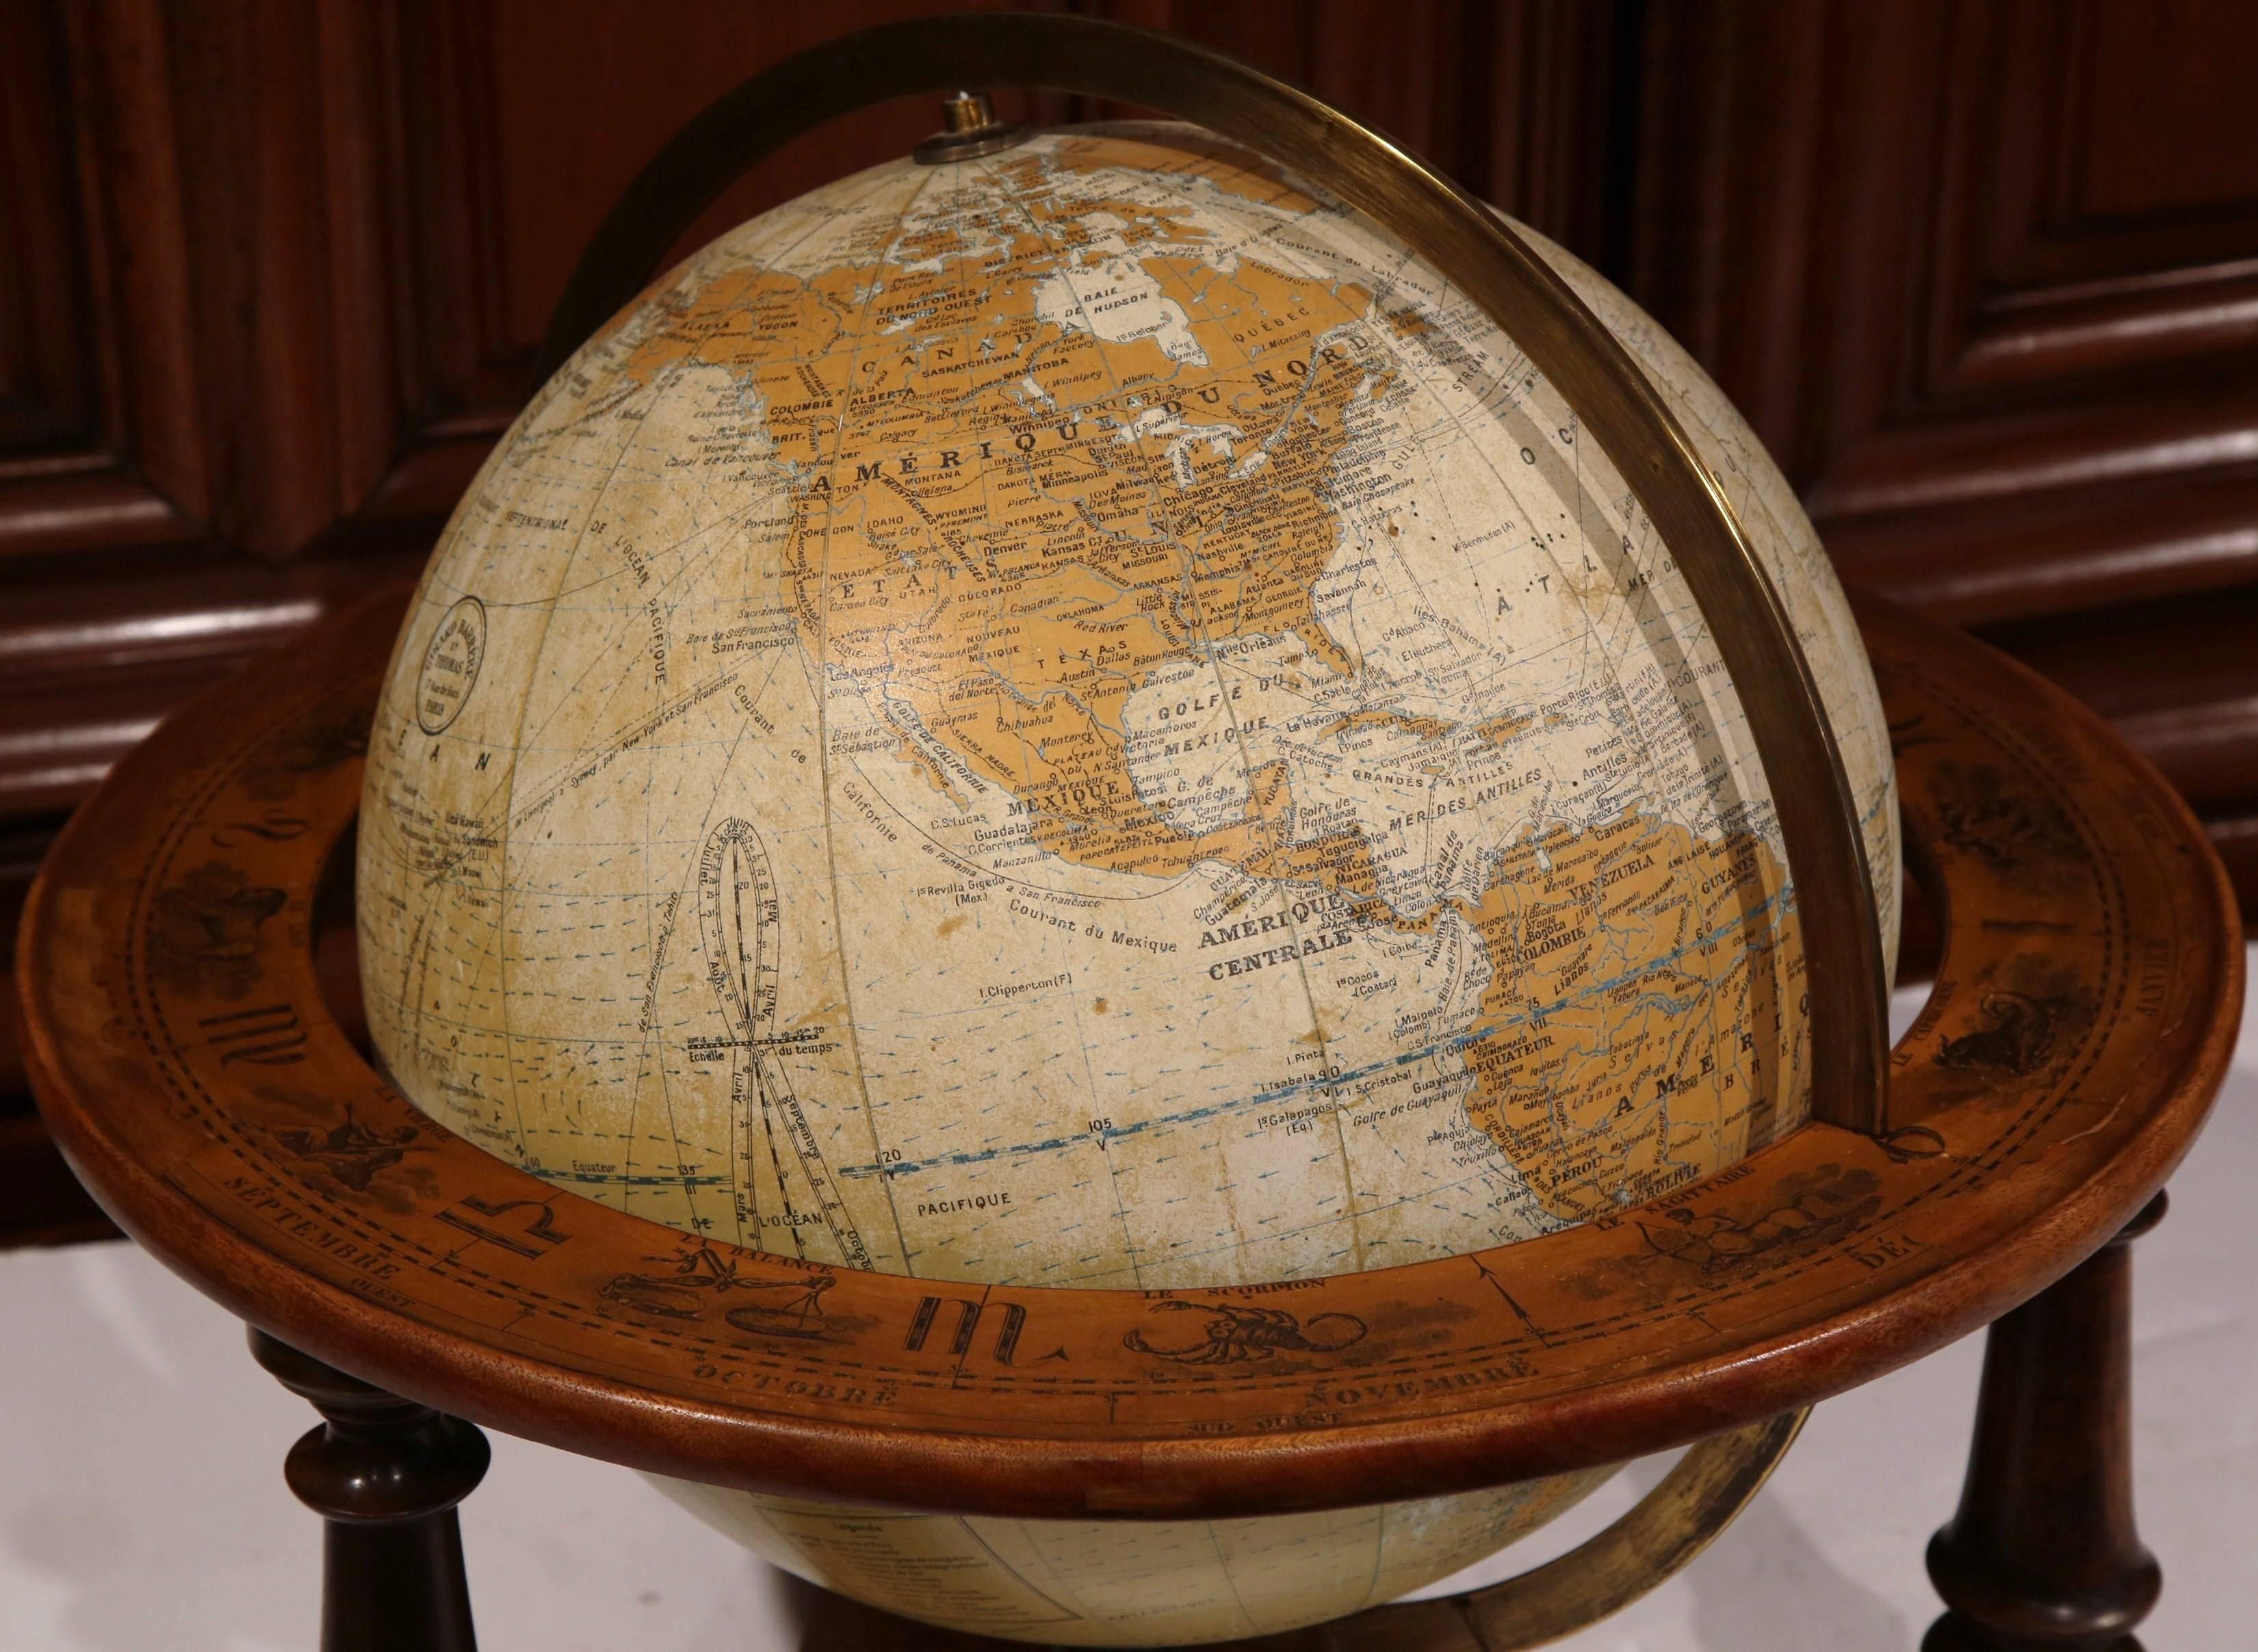 Complete your study or home office with this fine, antique terrestrial globe. Crafted in France, circa 1930, the globe sits on a sturdy walnut base with turned legs. The globe has a very detailed map in a muted, neutral palette of white and yellow.